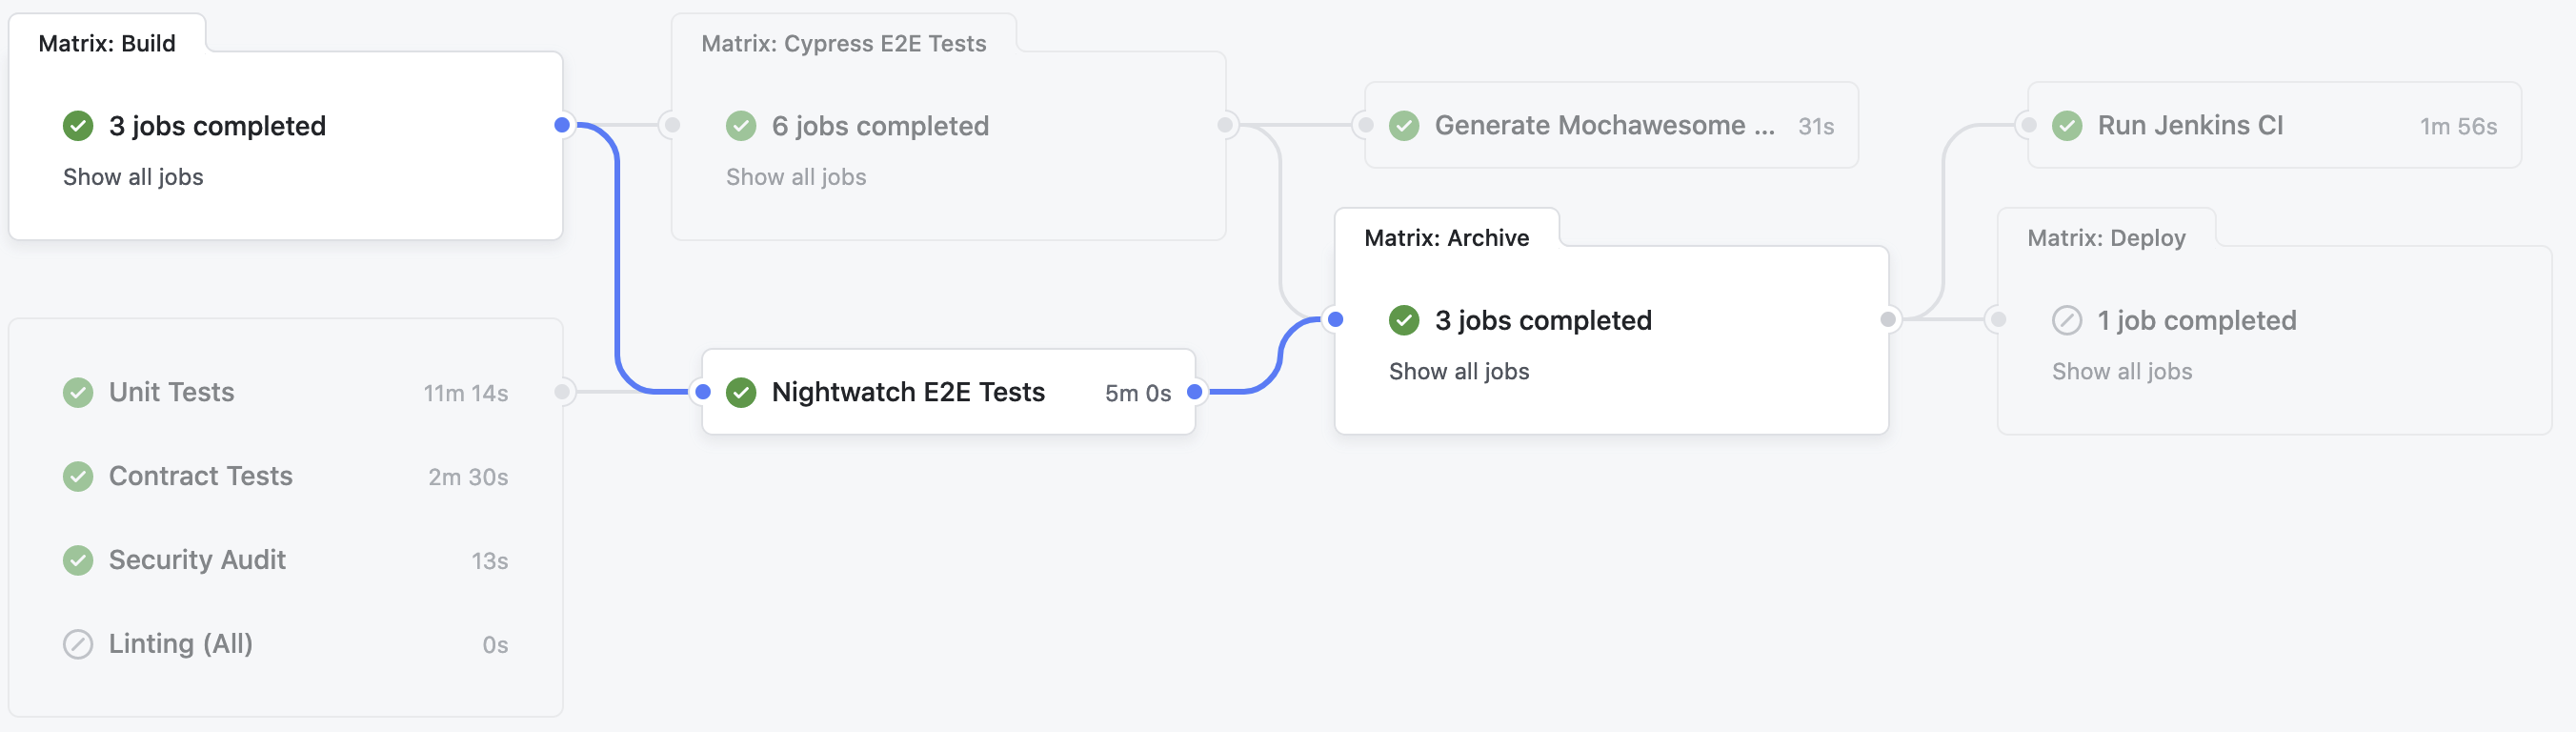 Screenshot shows that in the flow chart view of the pipeline for a certain commit, lines between the matrices indicate dependencies. Matrix Build shows that it is a dependency for Nightwatch E2E tests which is a dependency for Matrix Archive.